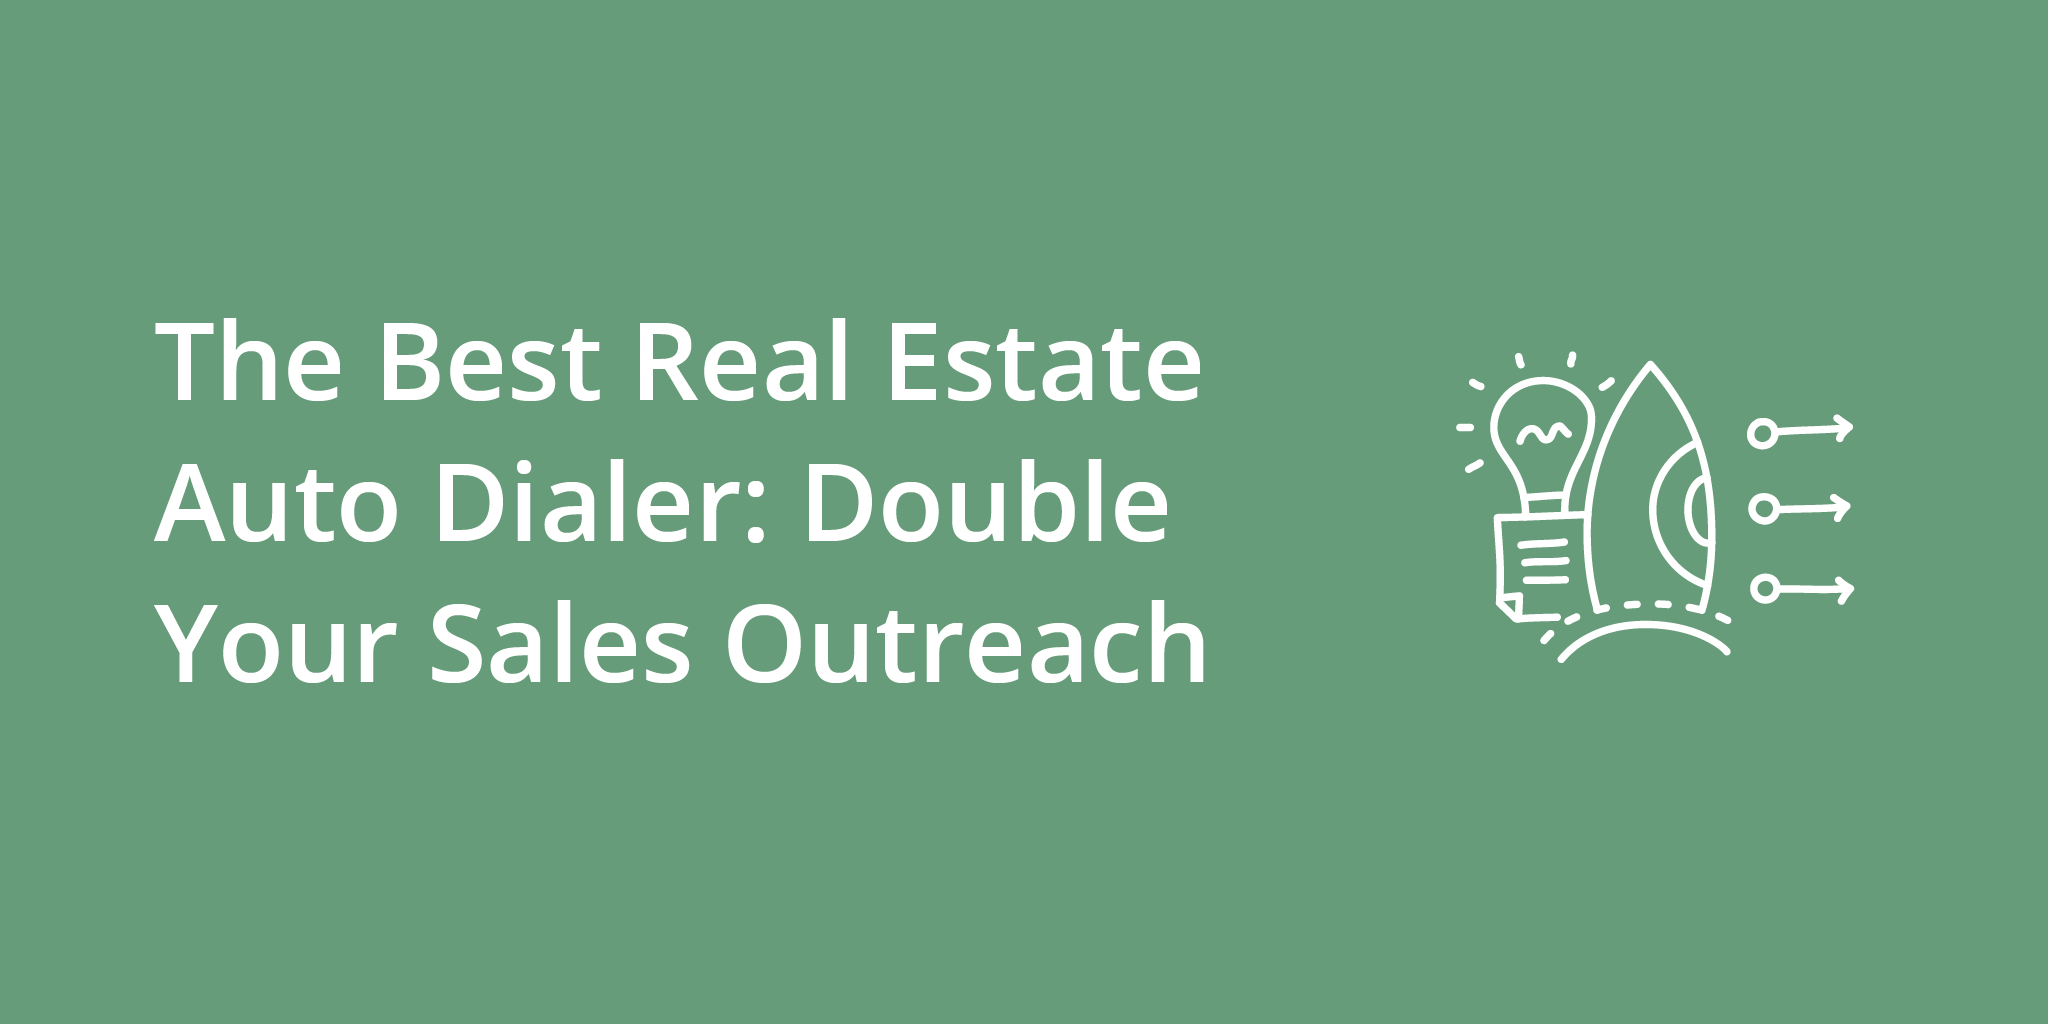 The Best Real Estate Auto Dialer: Double Your Sales Outreach | Telephones for business